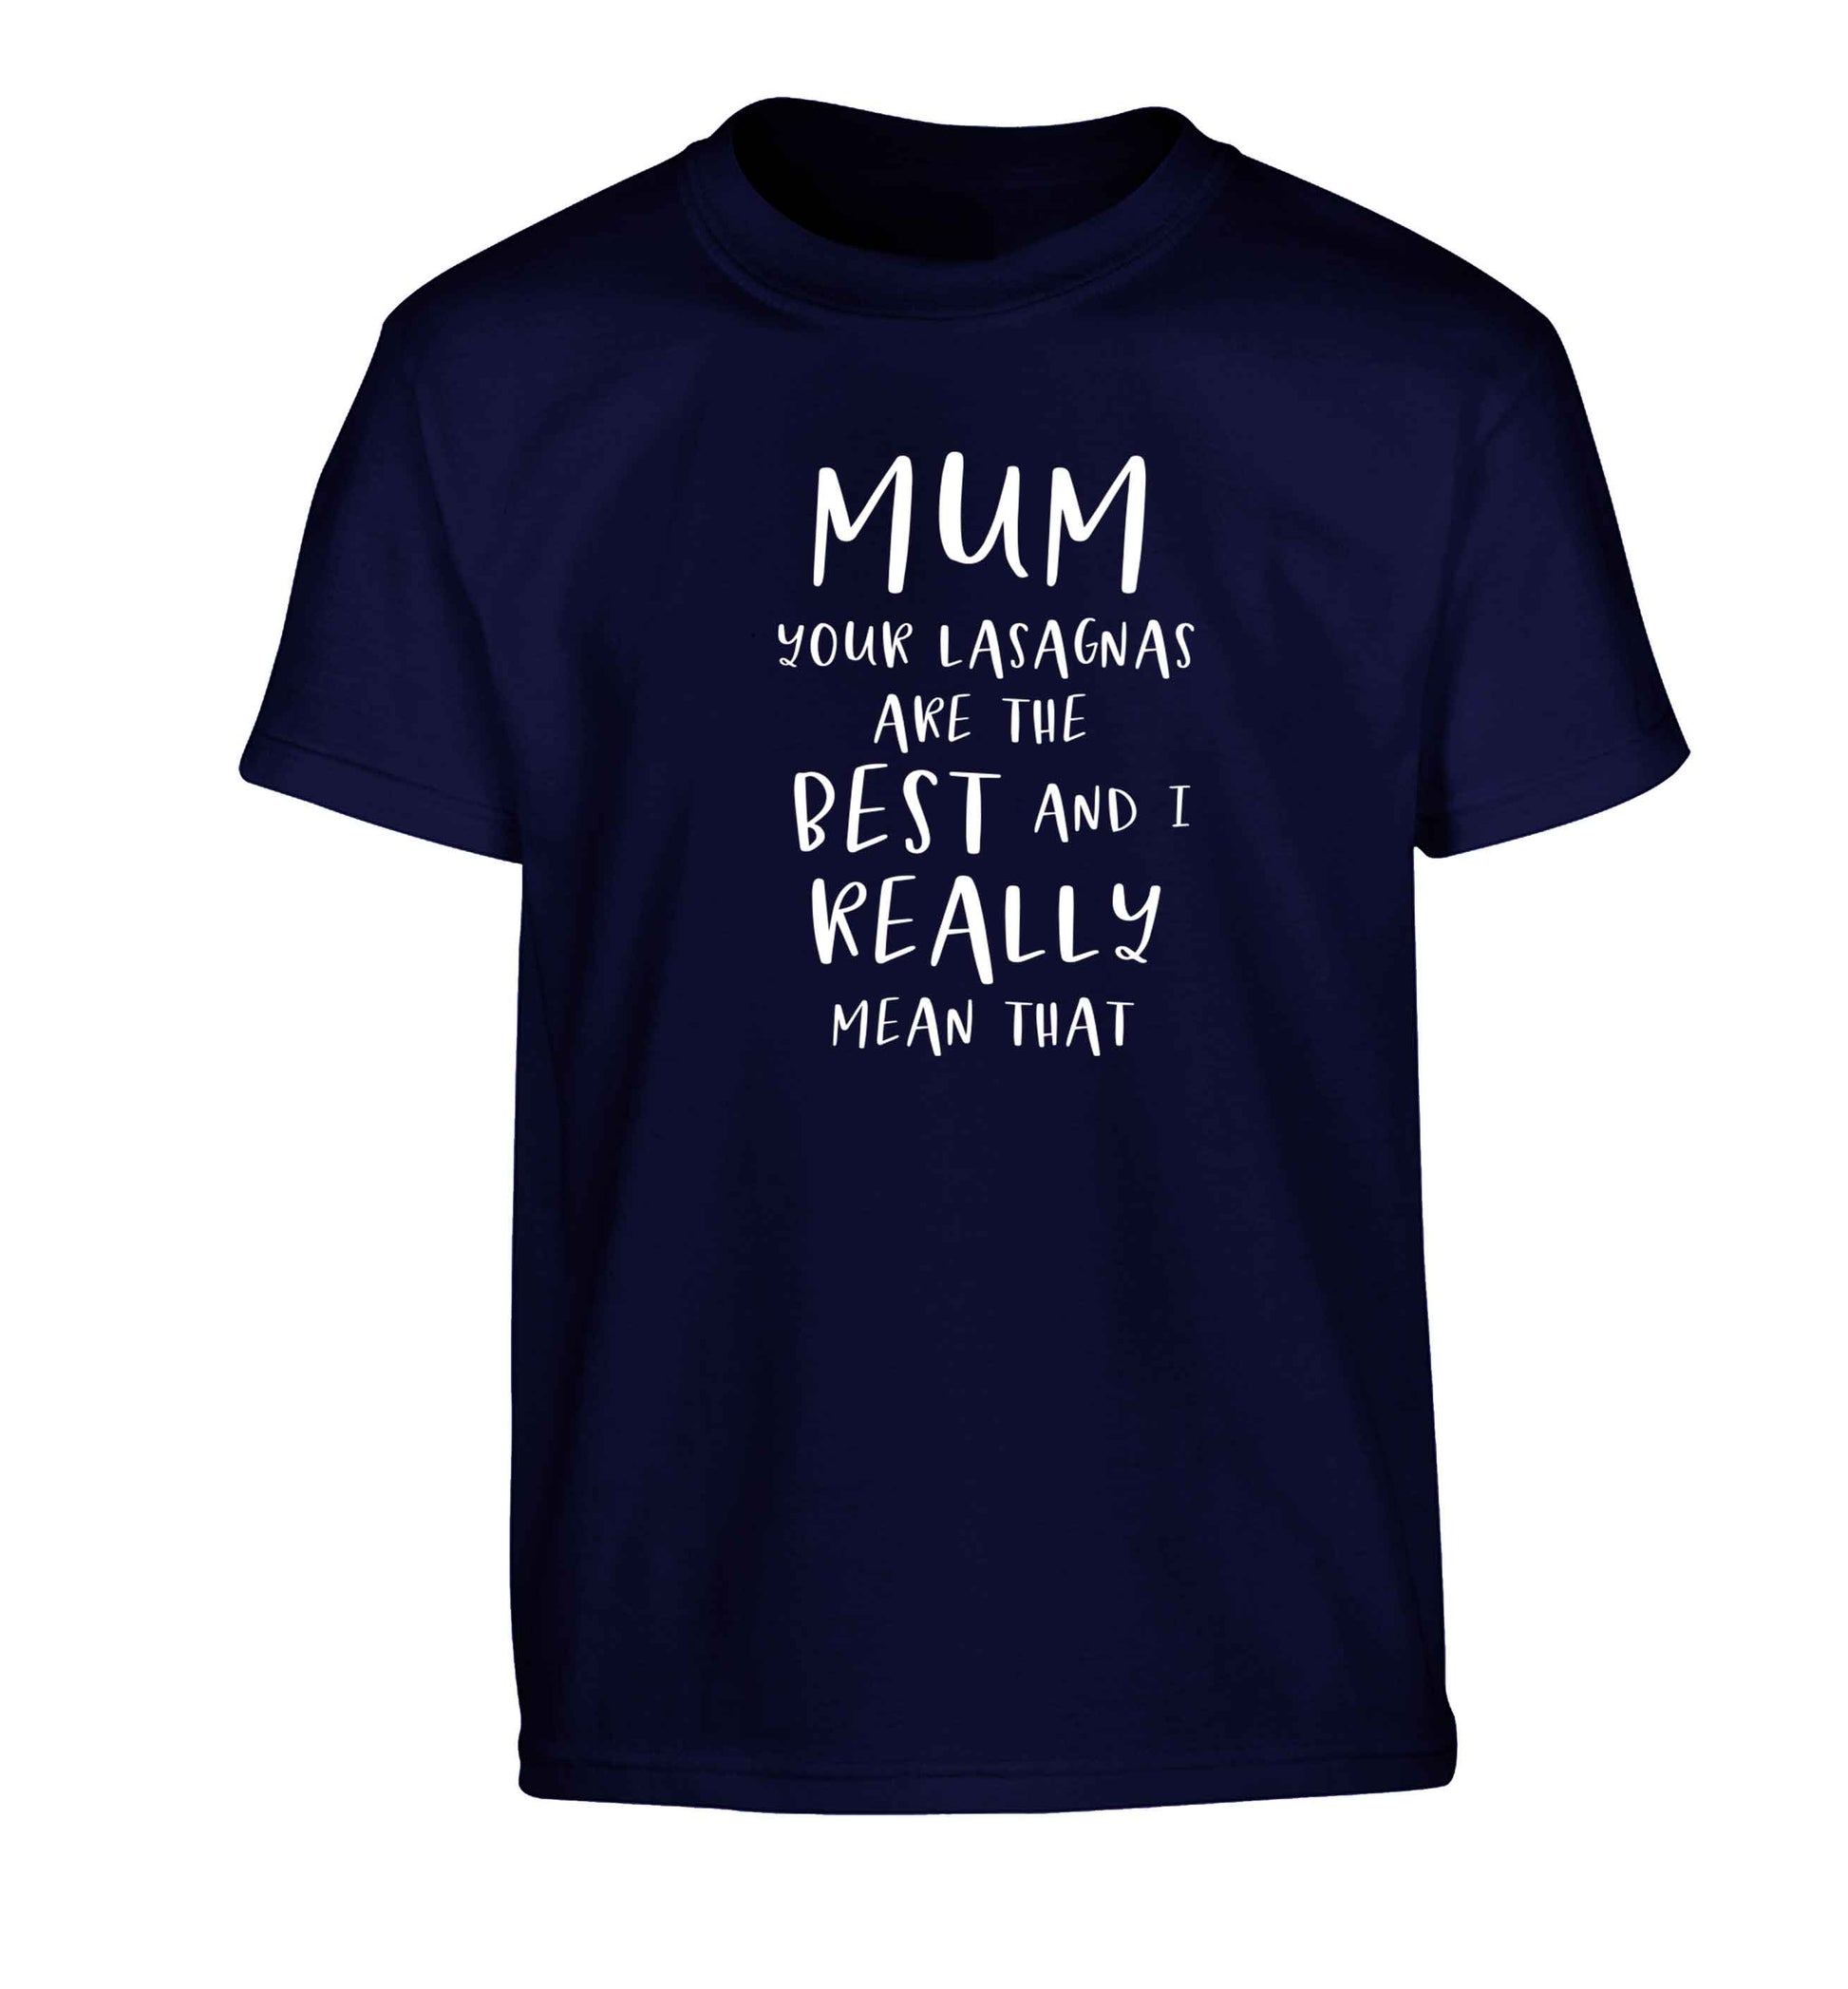 Funny gifts for your mum on mother's dayor her birthday! Mum your lasagnas are the best and I really mean that Children's navy Tshirt 12-13 Years